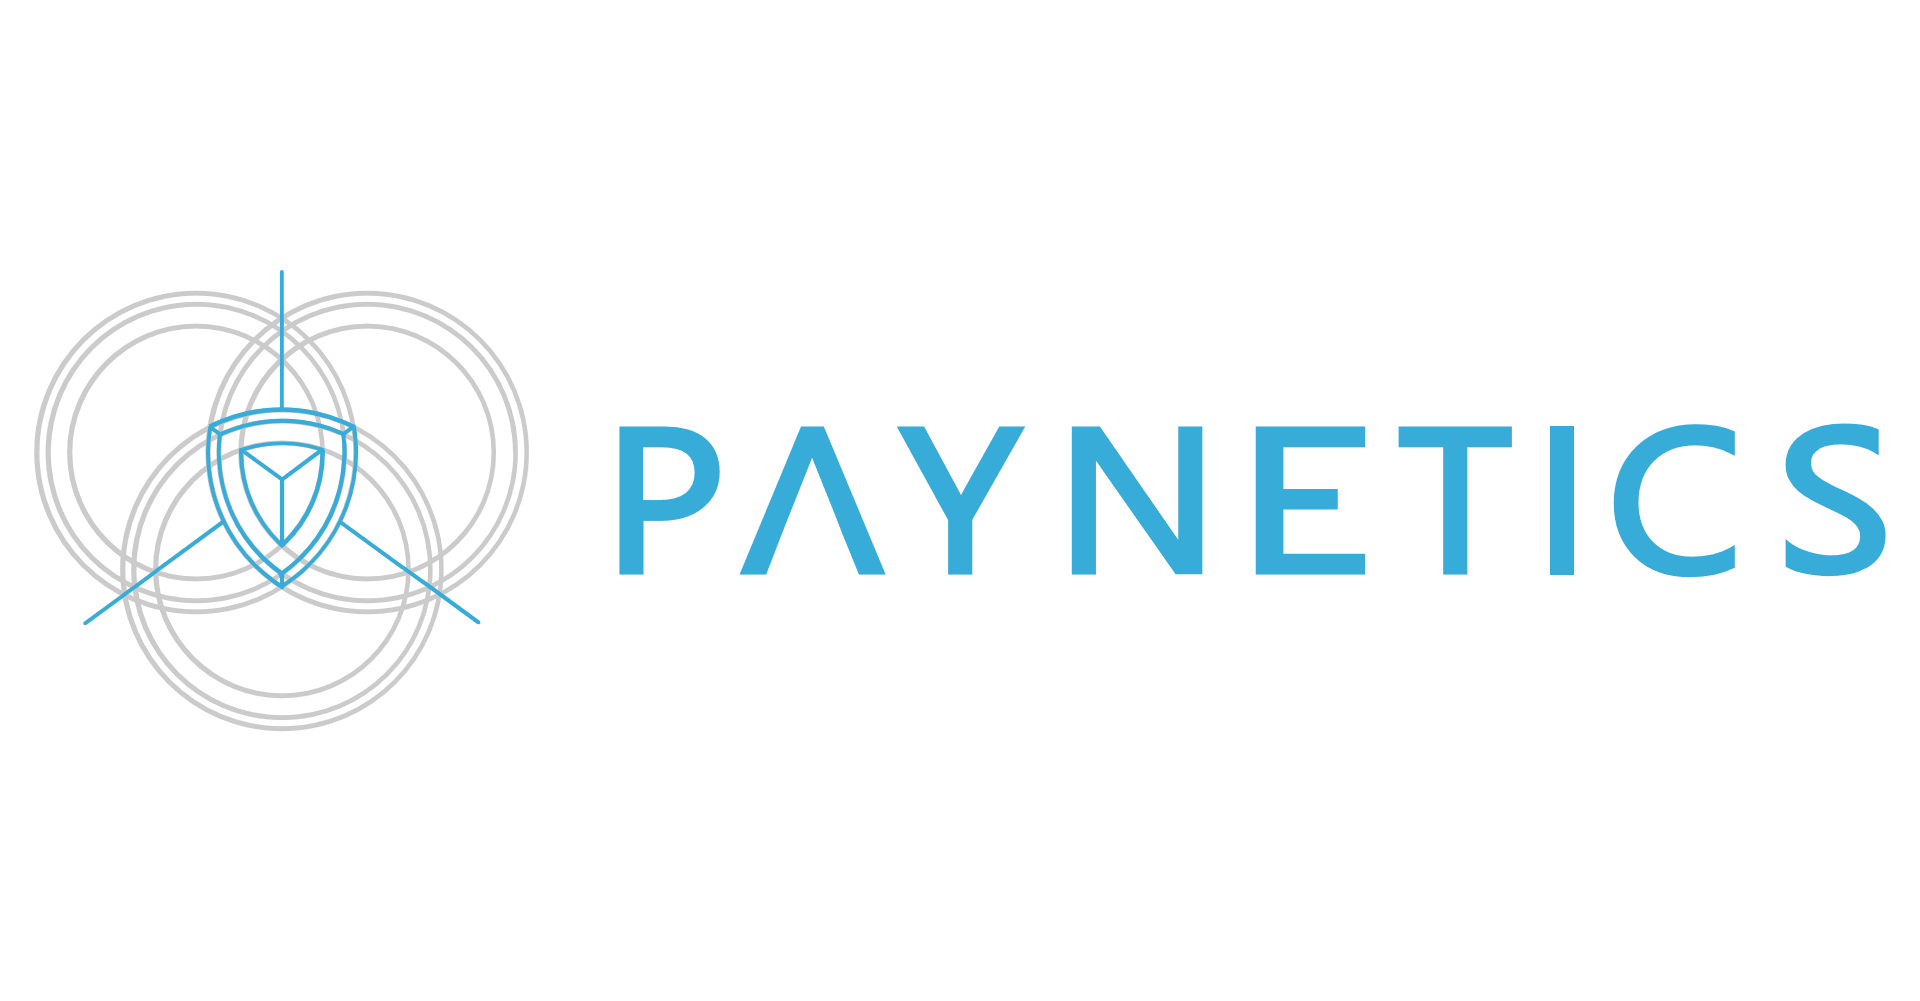 Paynetics bolsters executive team to launch global cards issuance